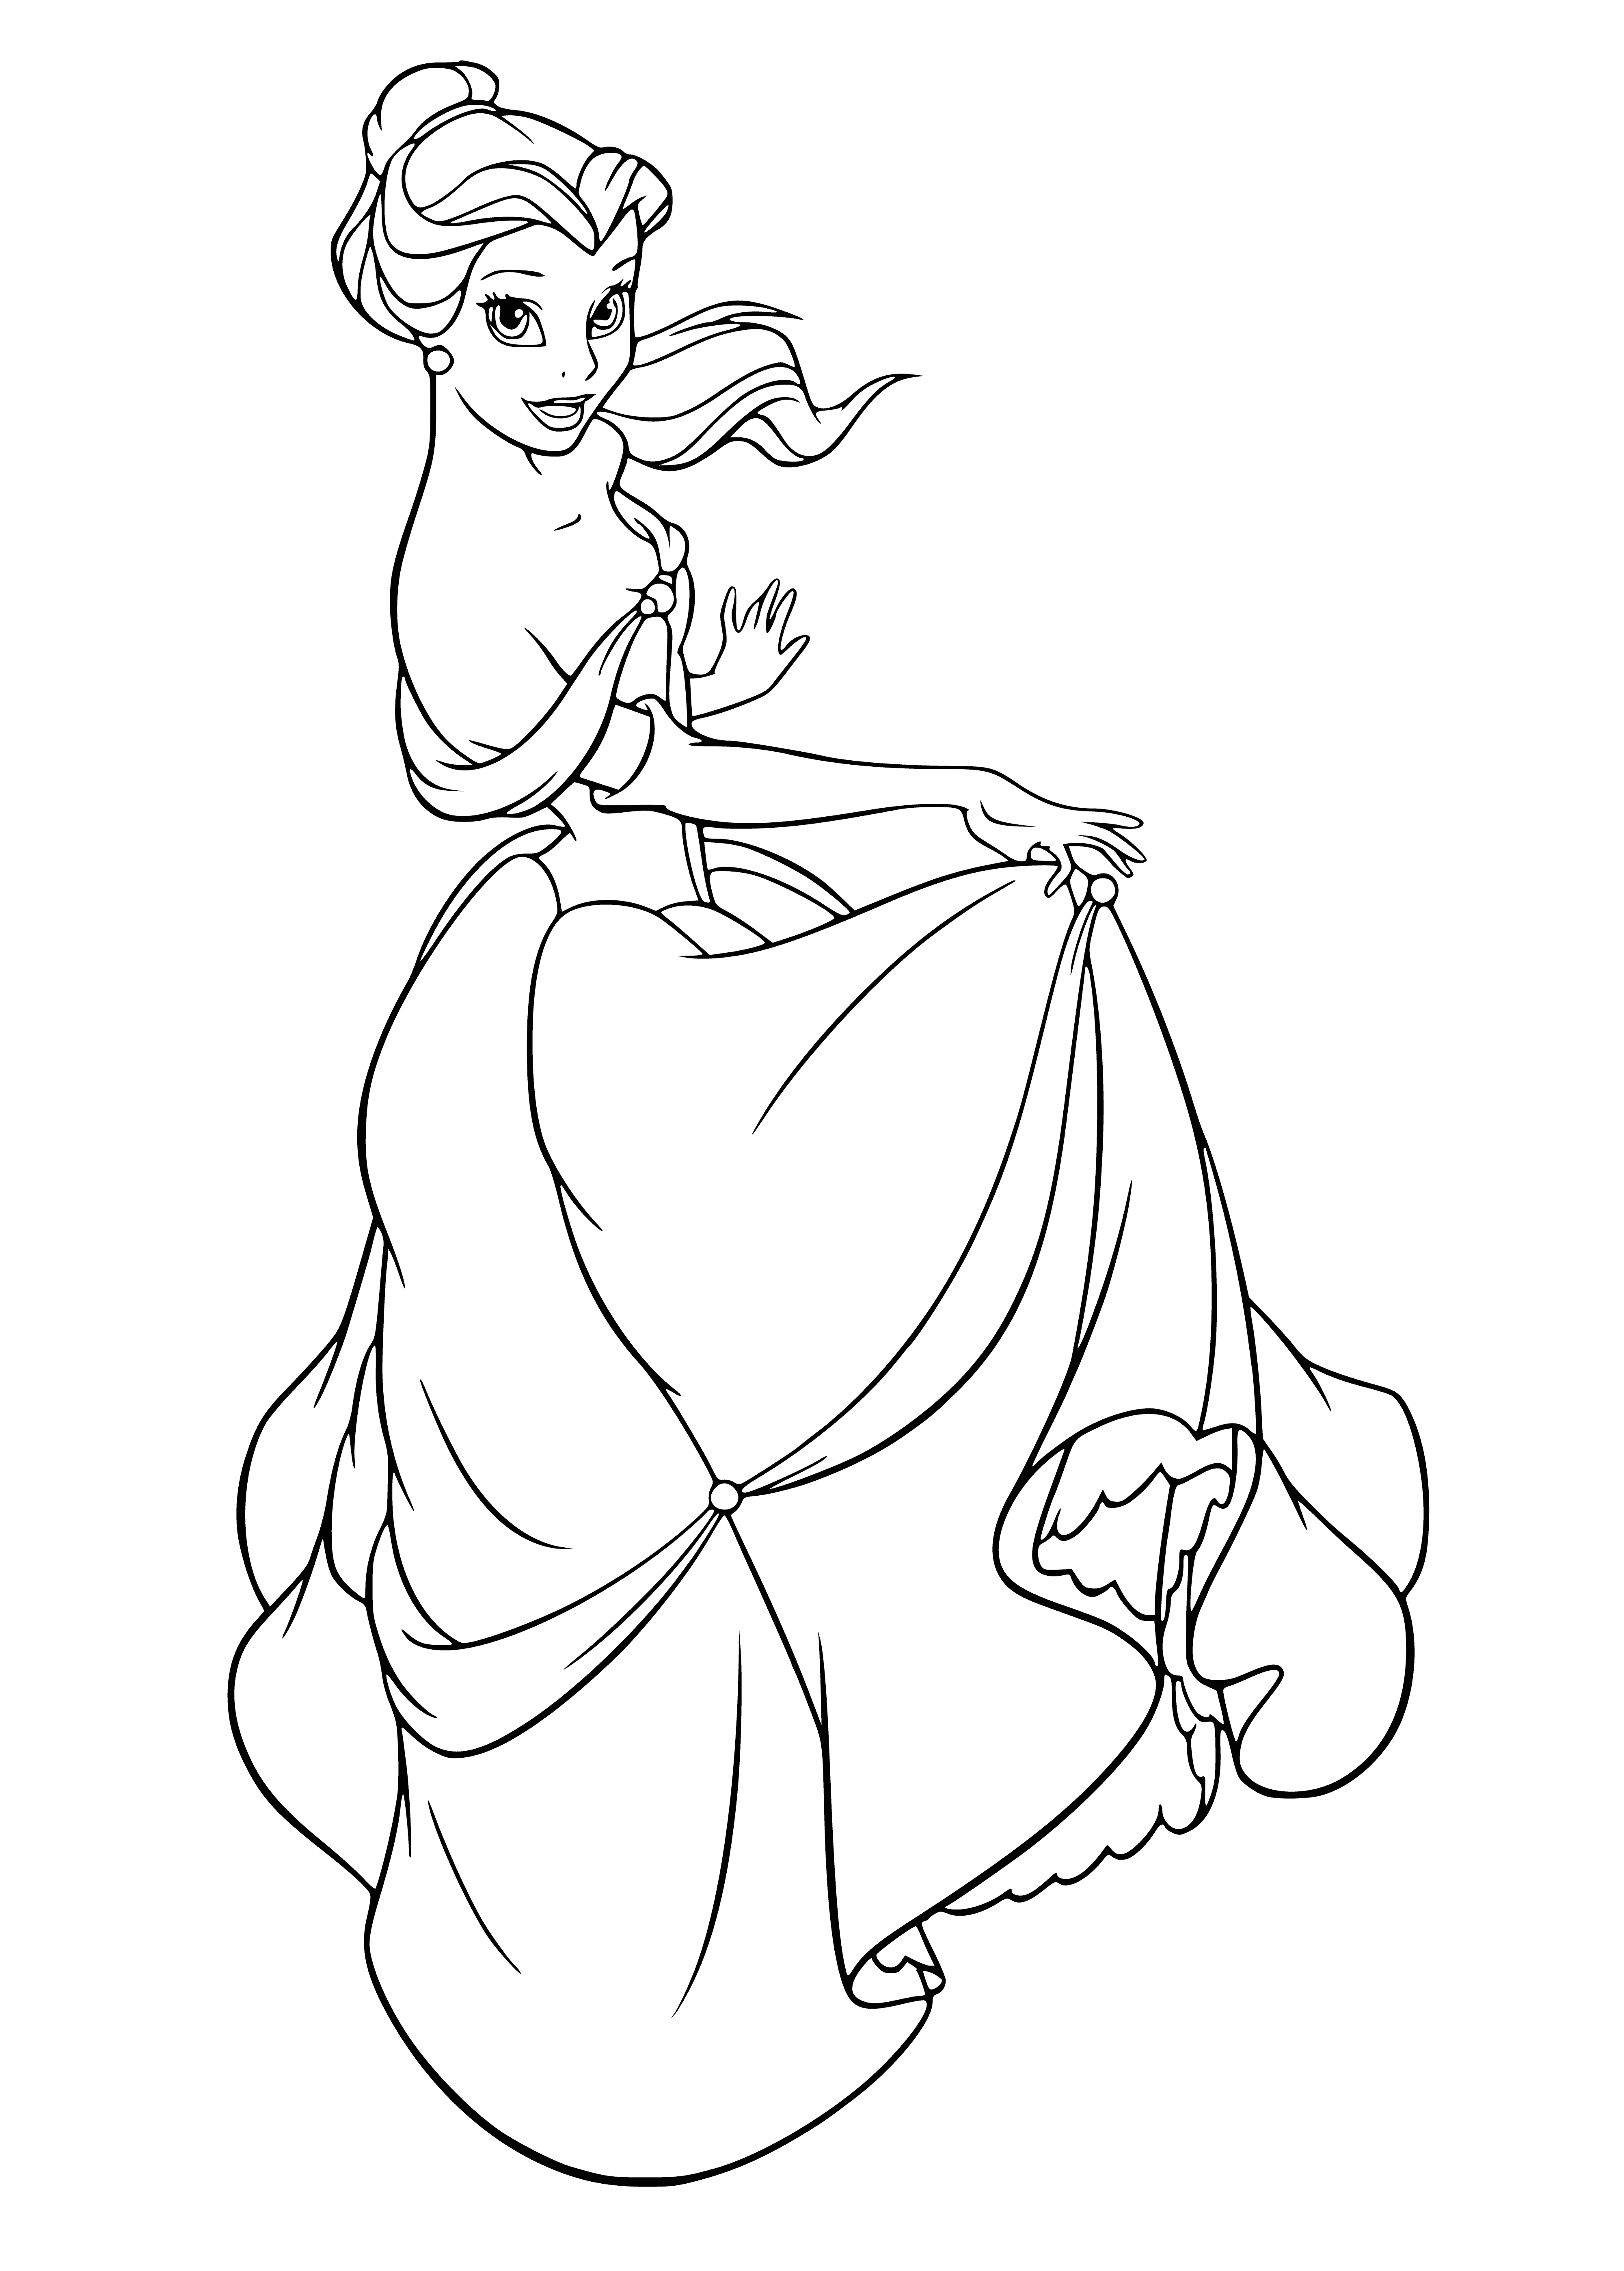 Belle dancing coloring page